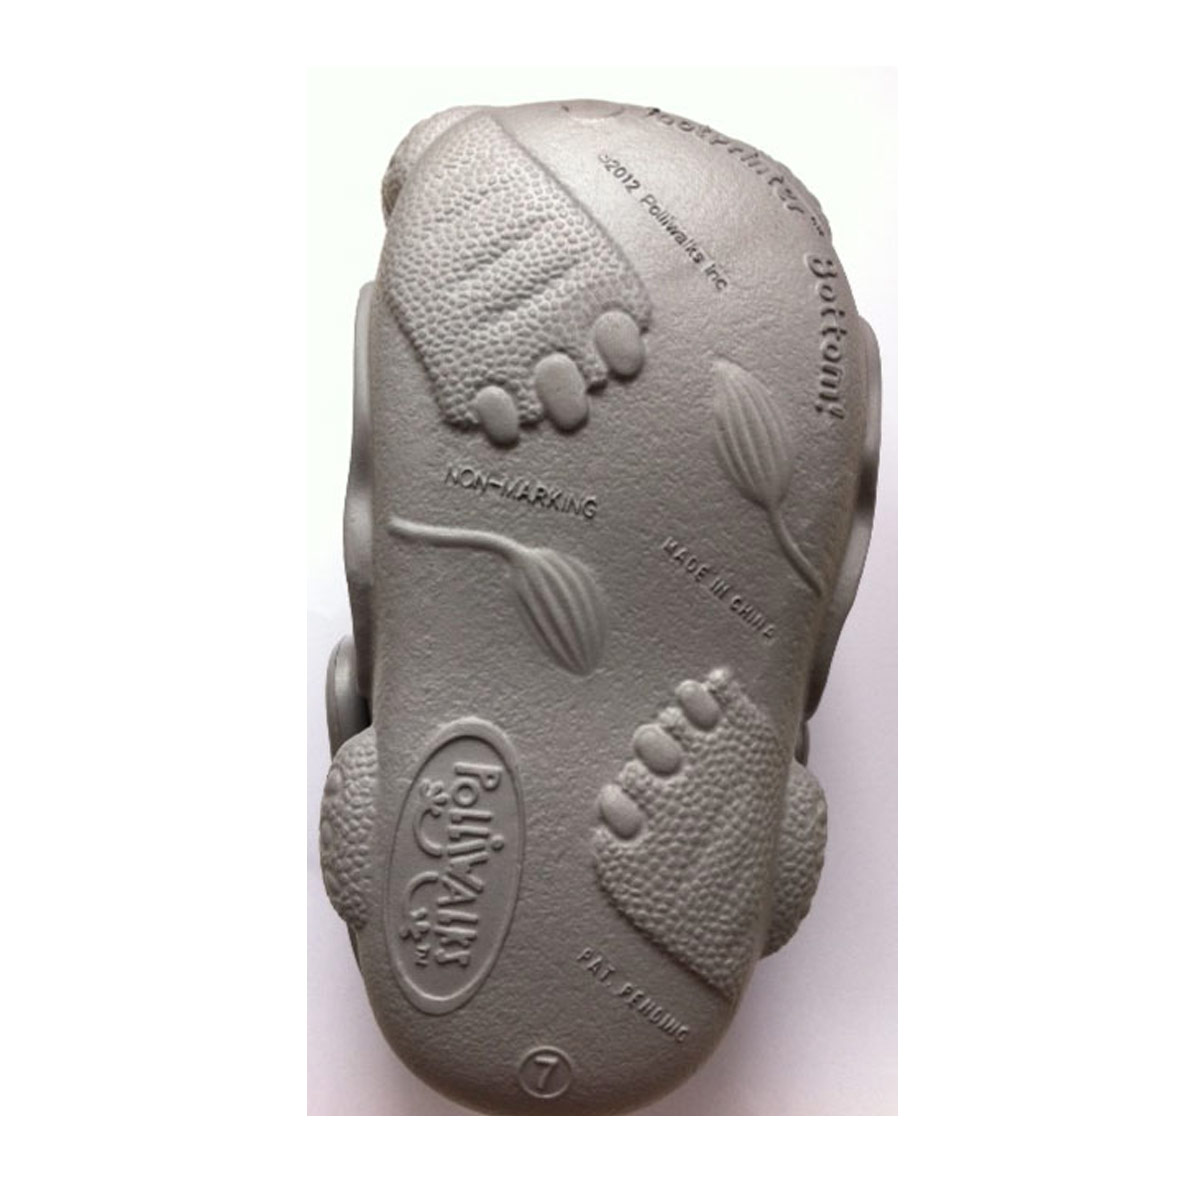 Polliwalks : Toddler shoes Ethan the ELEPHANT Gray # 11